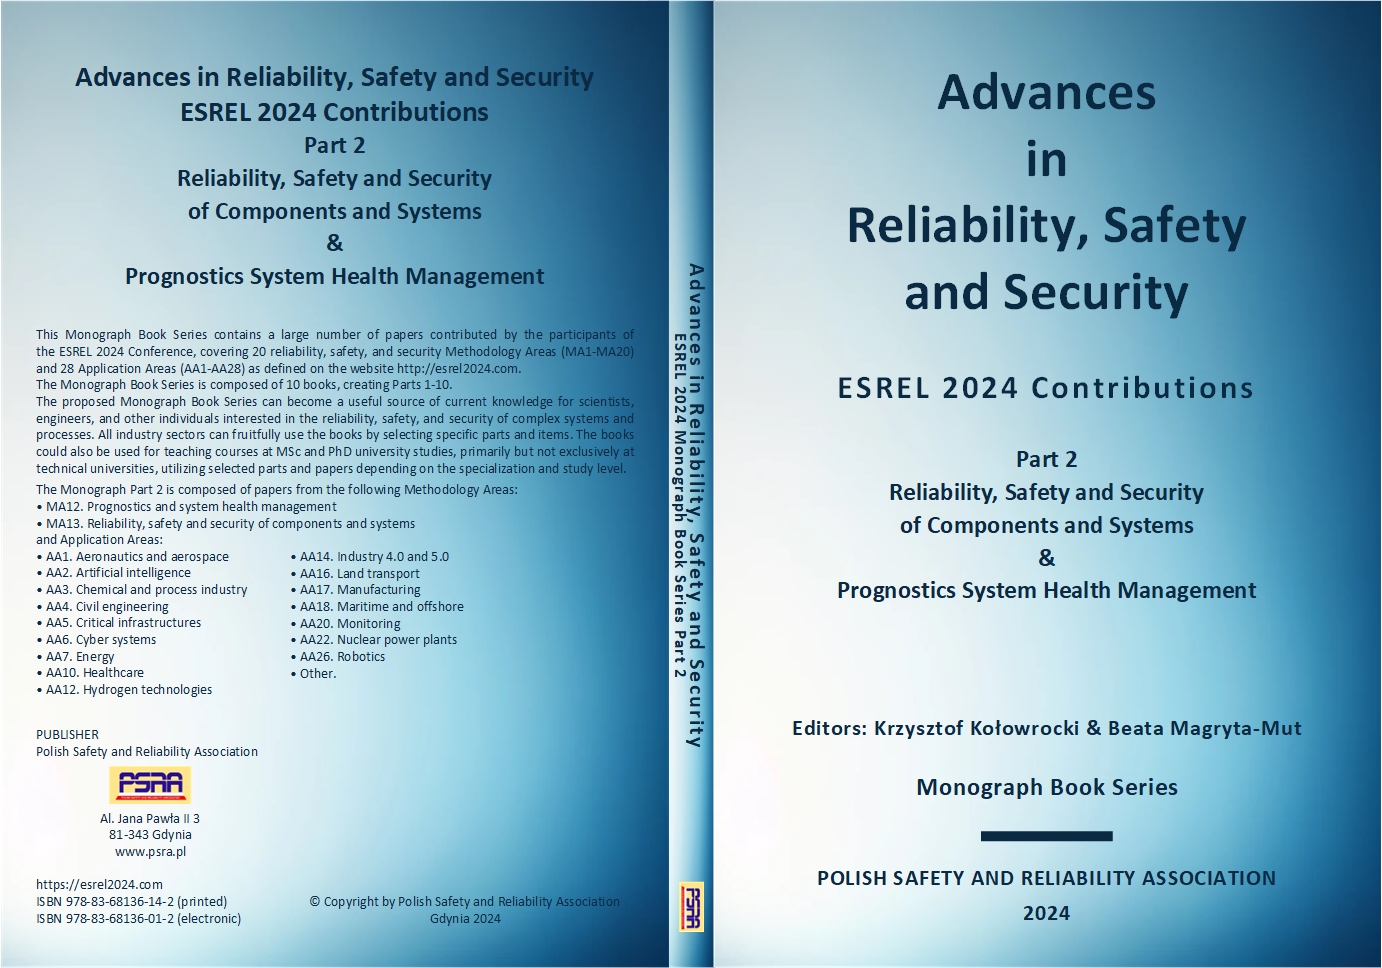 Part 2 Reliability, Safety and Security of Components and Systems & Prognostics System Health Management